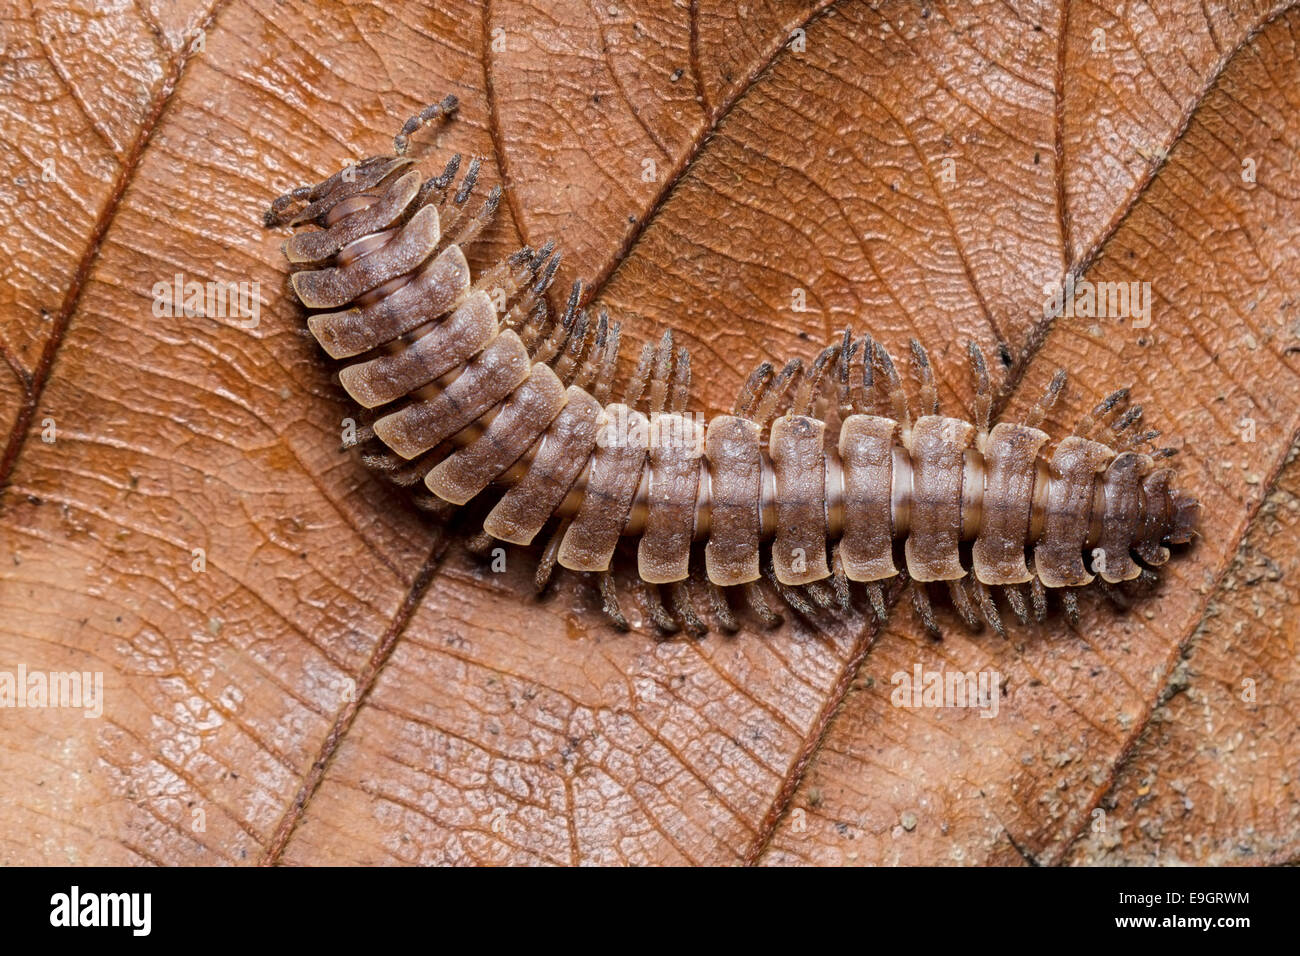 Flat-backed Millipede (Polydesmus angustus) in tropical rainforest of Malaysia Stock Photo